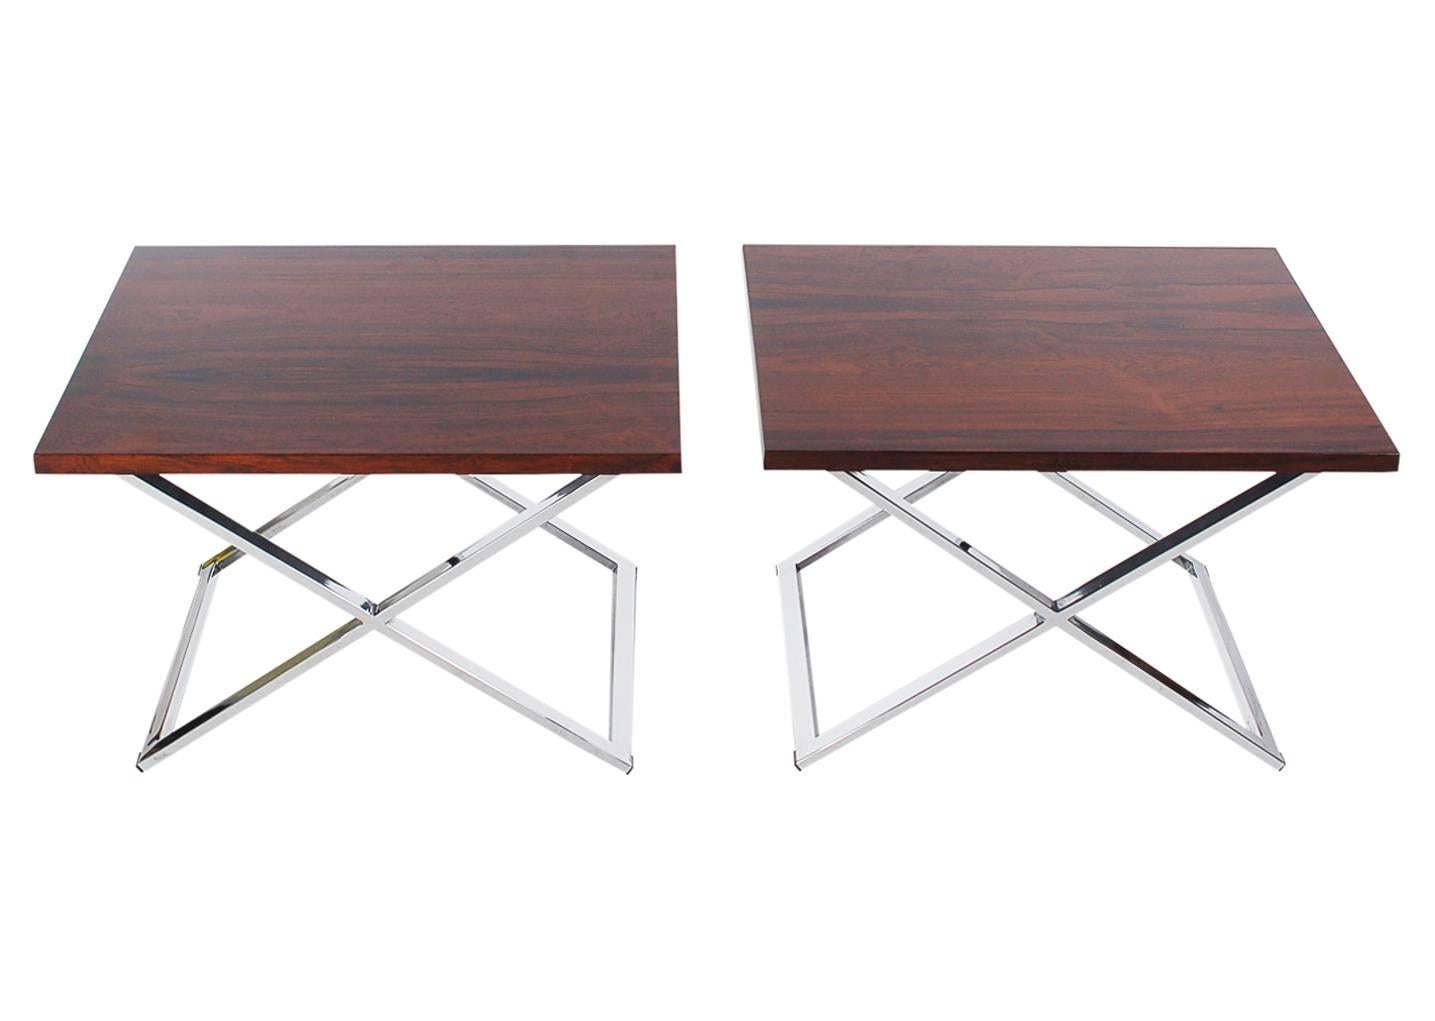 A handsome pair of X-base tables attributed to Milo Baughman for Thayer Coggin. They feature polished chrome bases with beautifully grained rosewood tops. Price includes the pair.